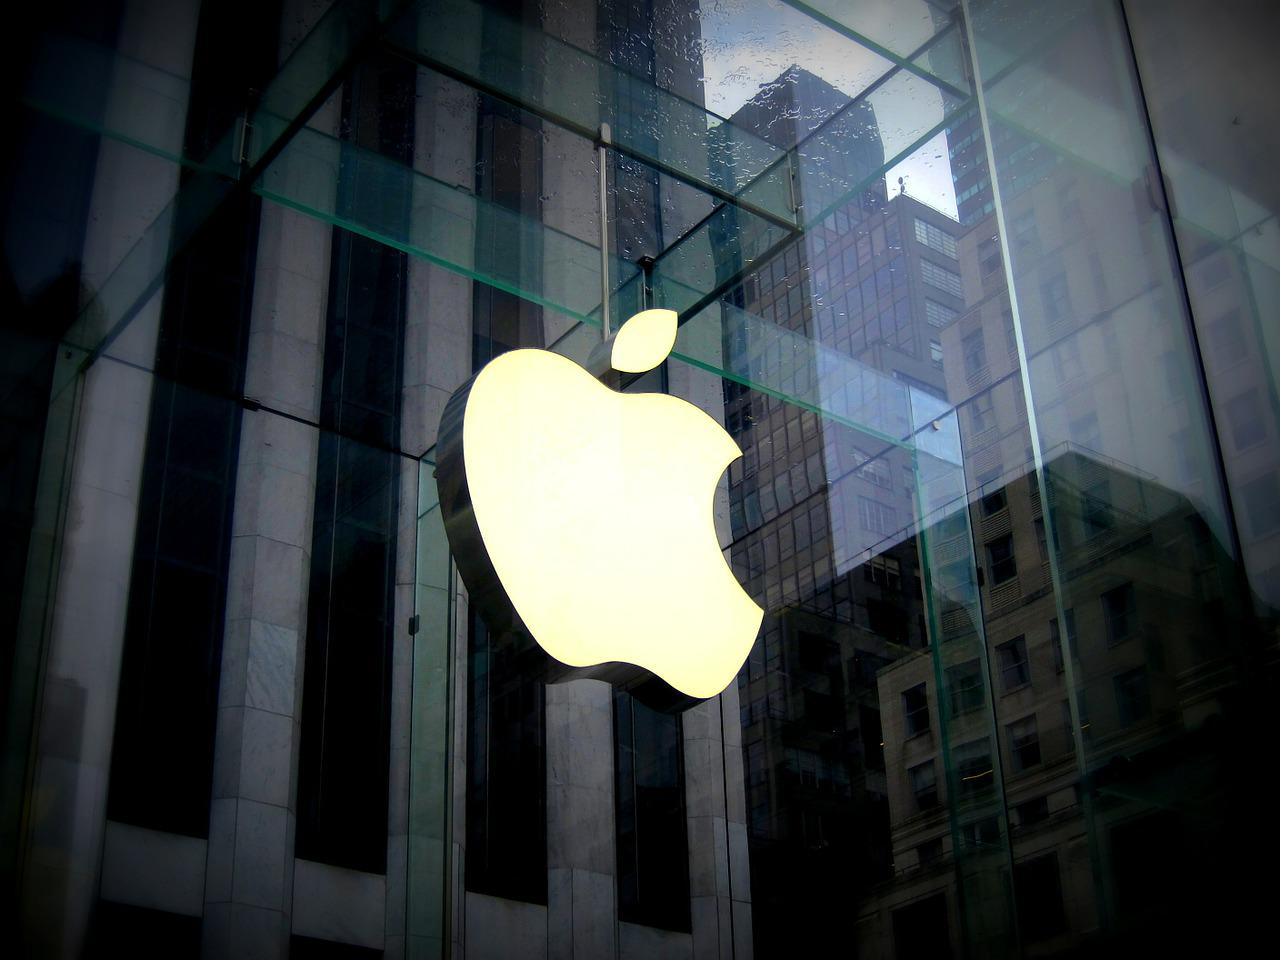 US appeals court rules Apple can proceed with suit against Patent Office over patentability review process